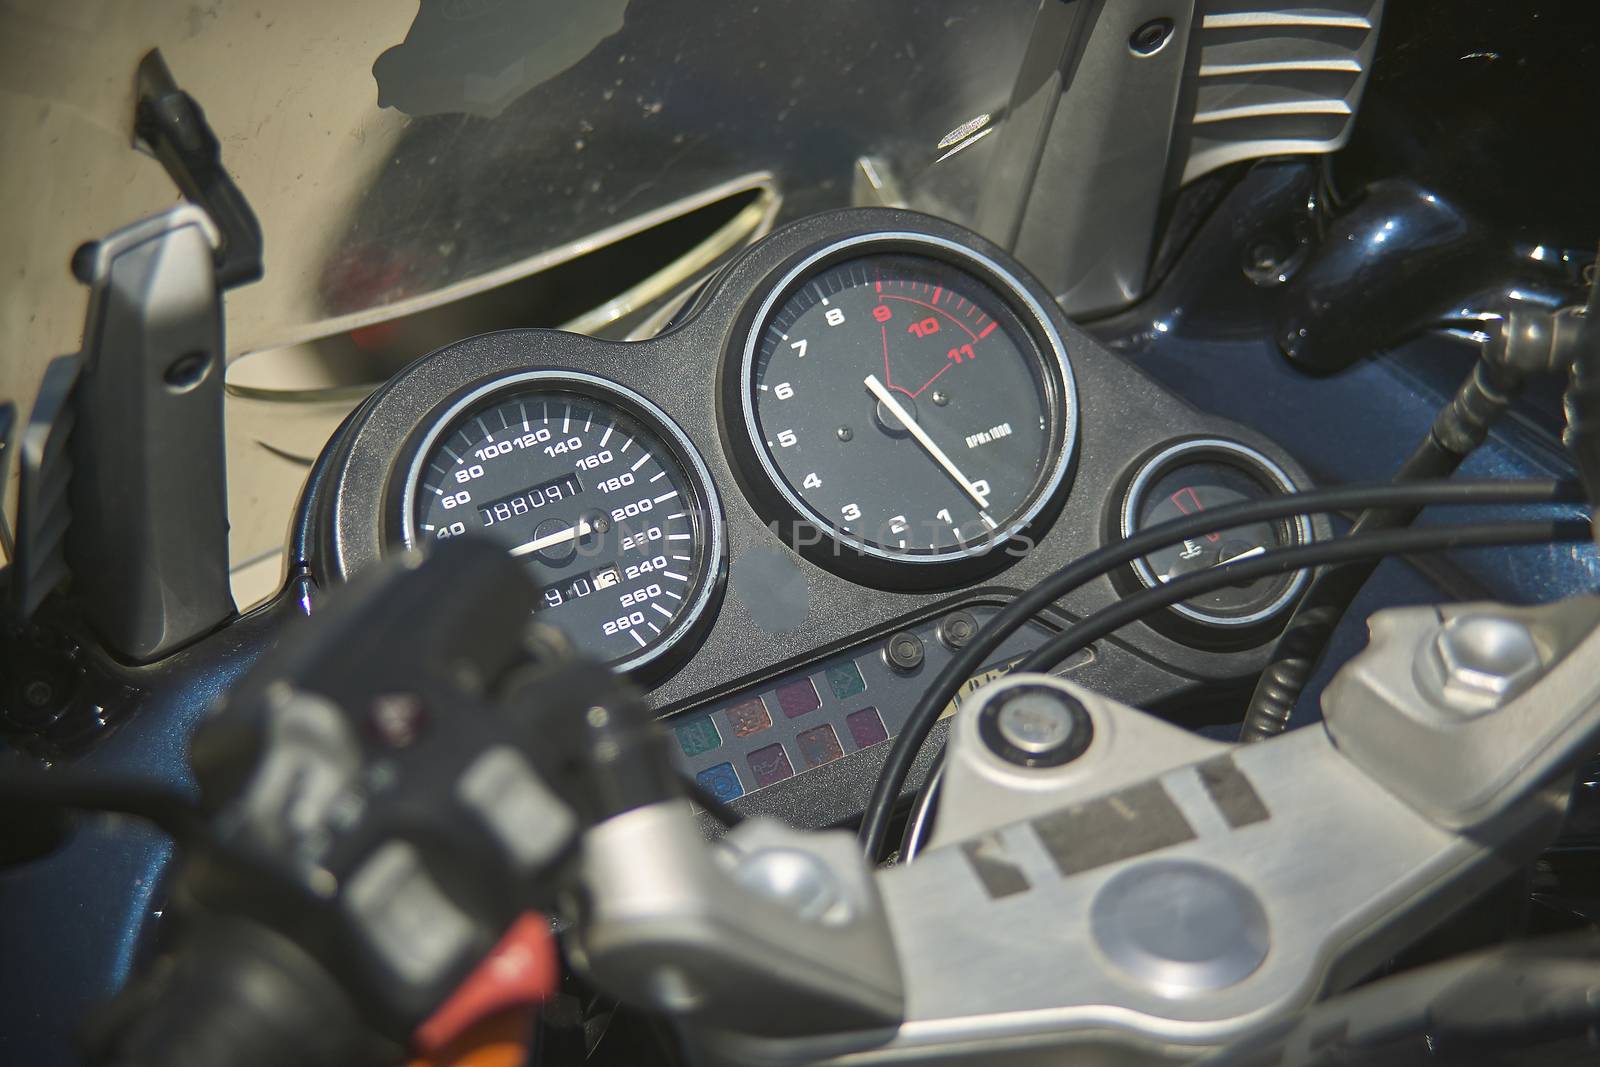 The odometer of a motorcycle 2 by pippocarlot